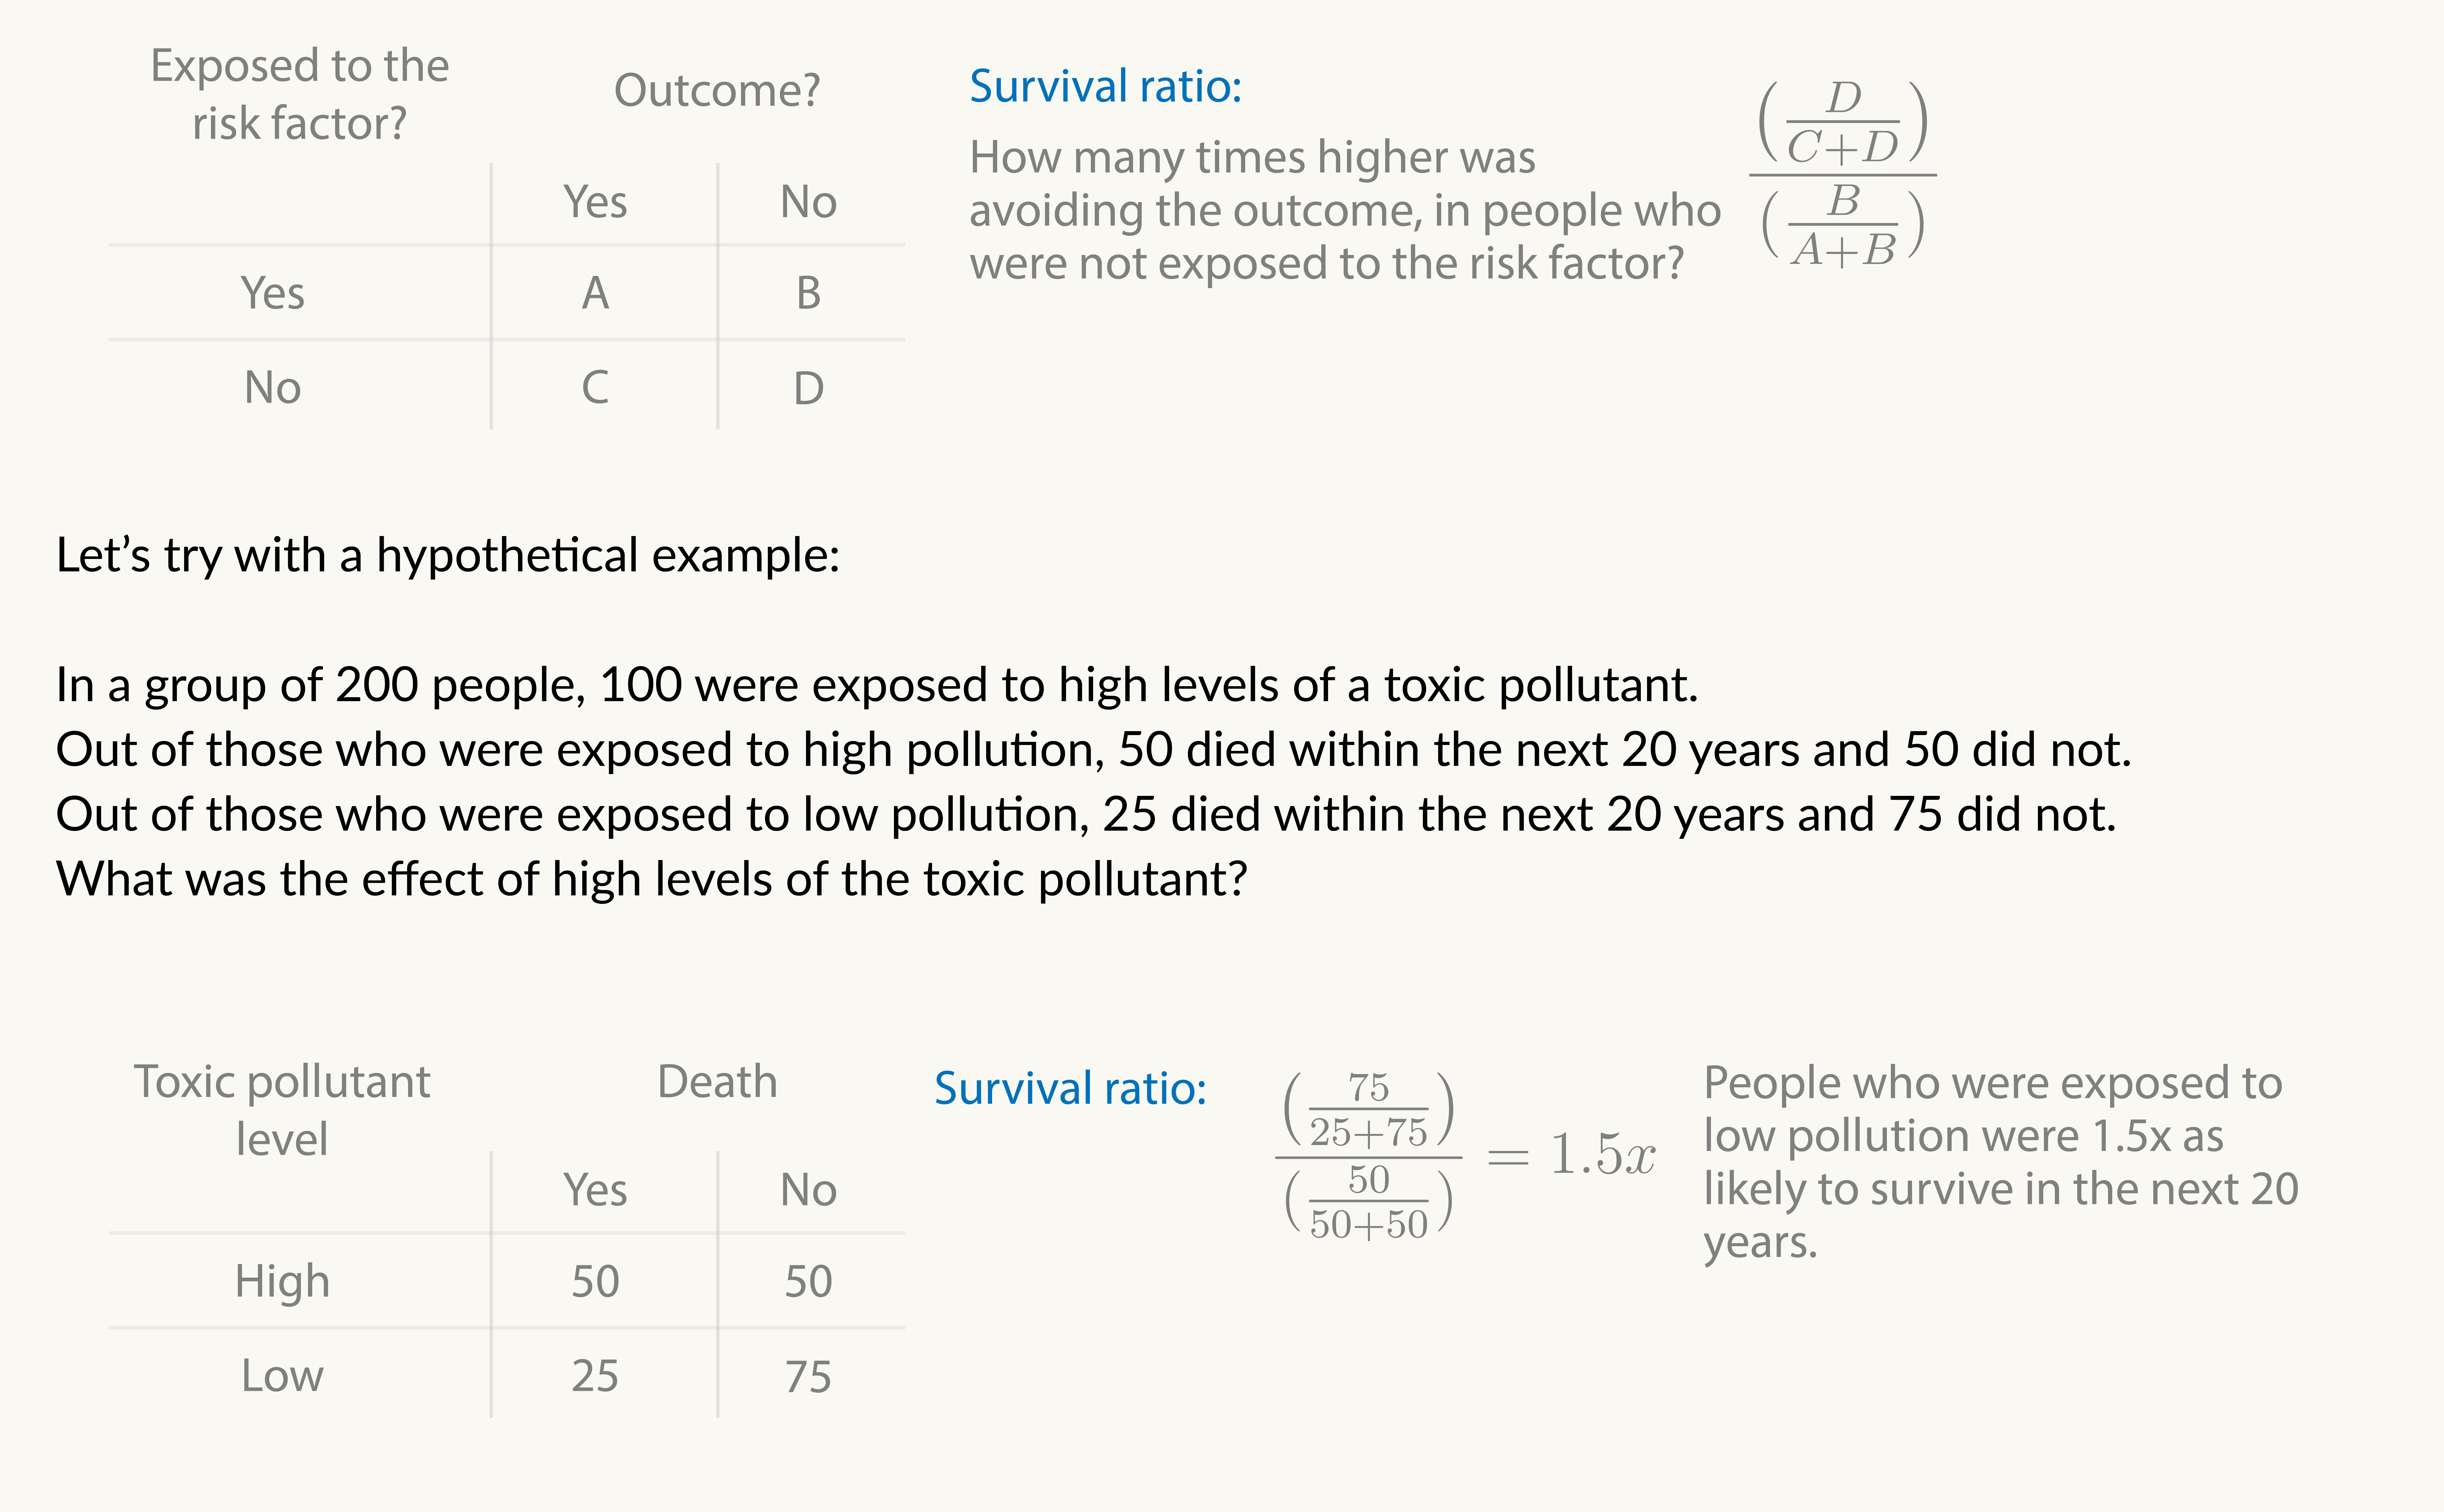 How to calculate the survival ratio, with a hypothetical example